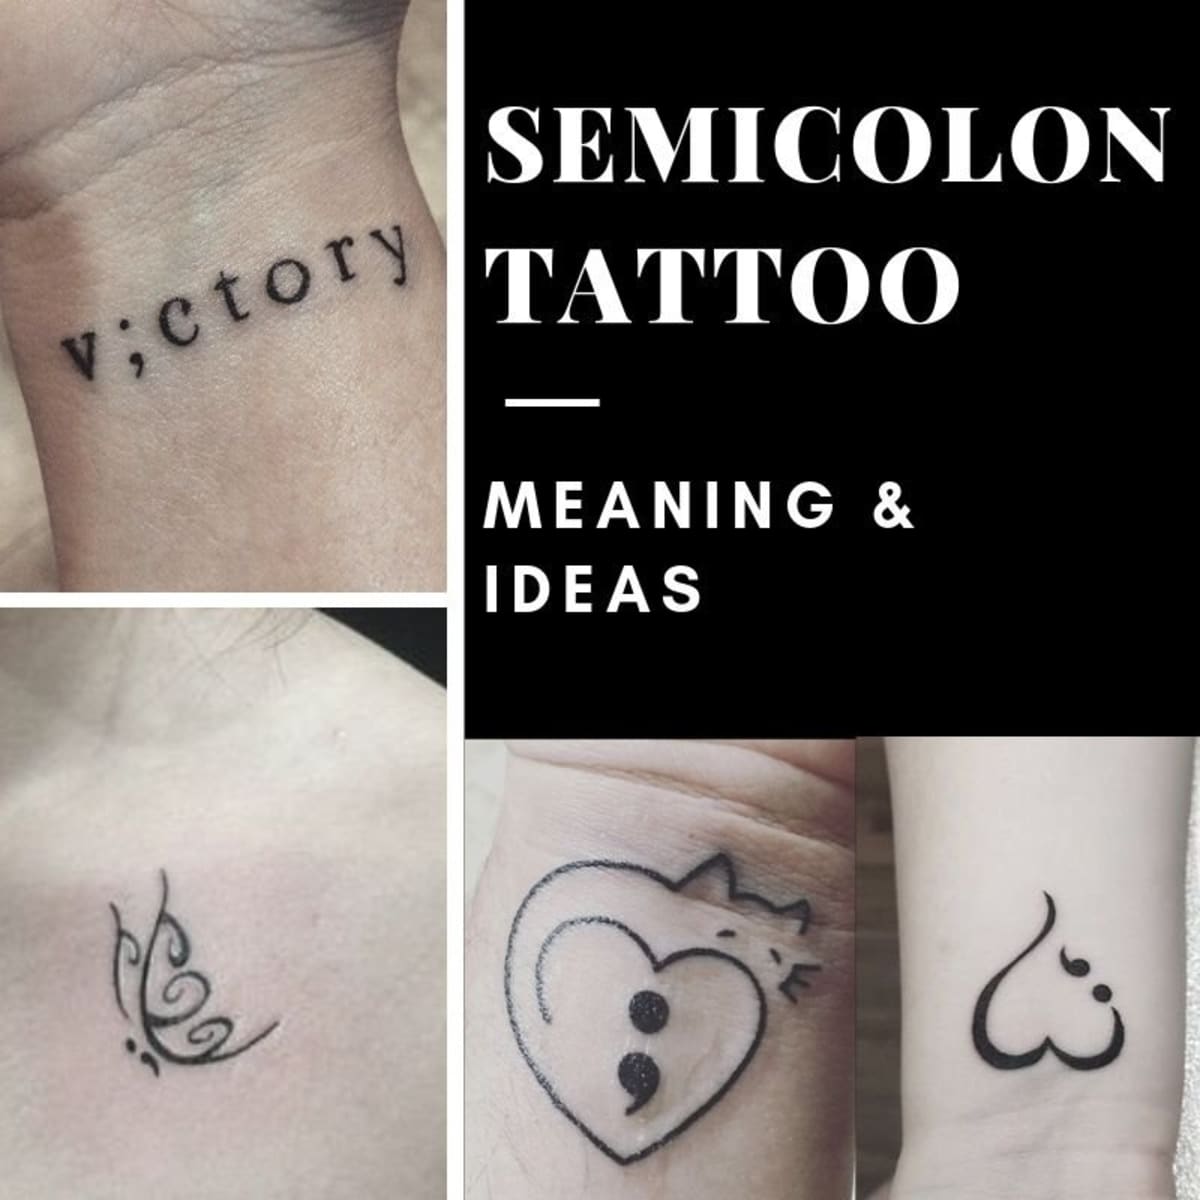 Semicolon Tattoo Meaning, Ideas, and Pictures - TatRing